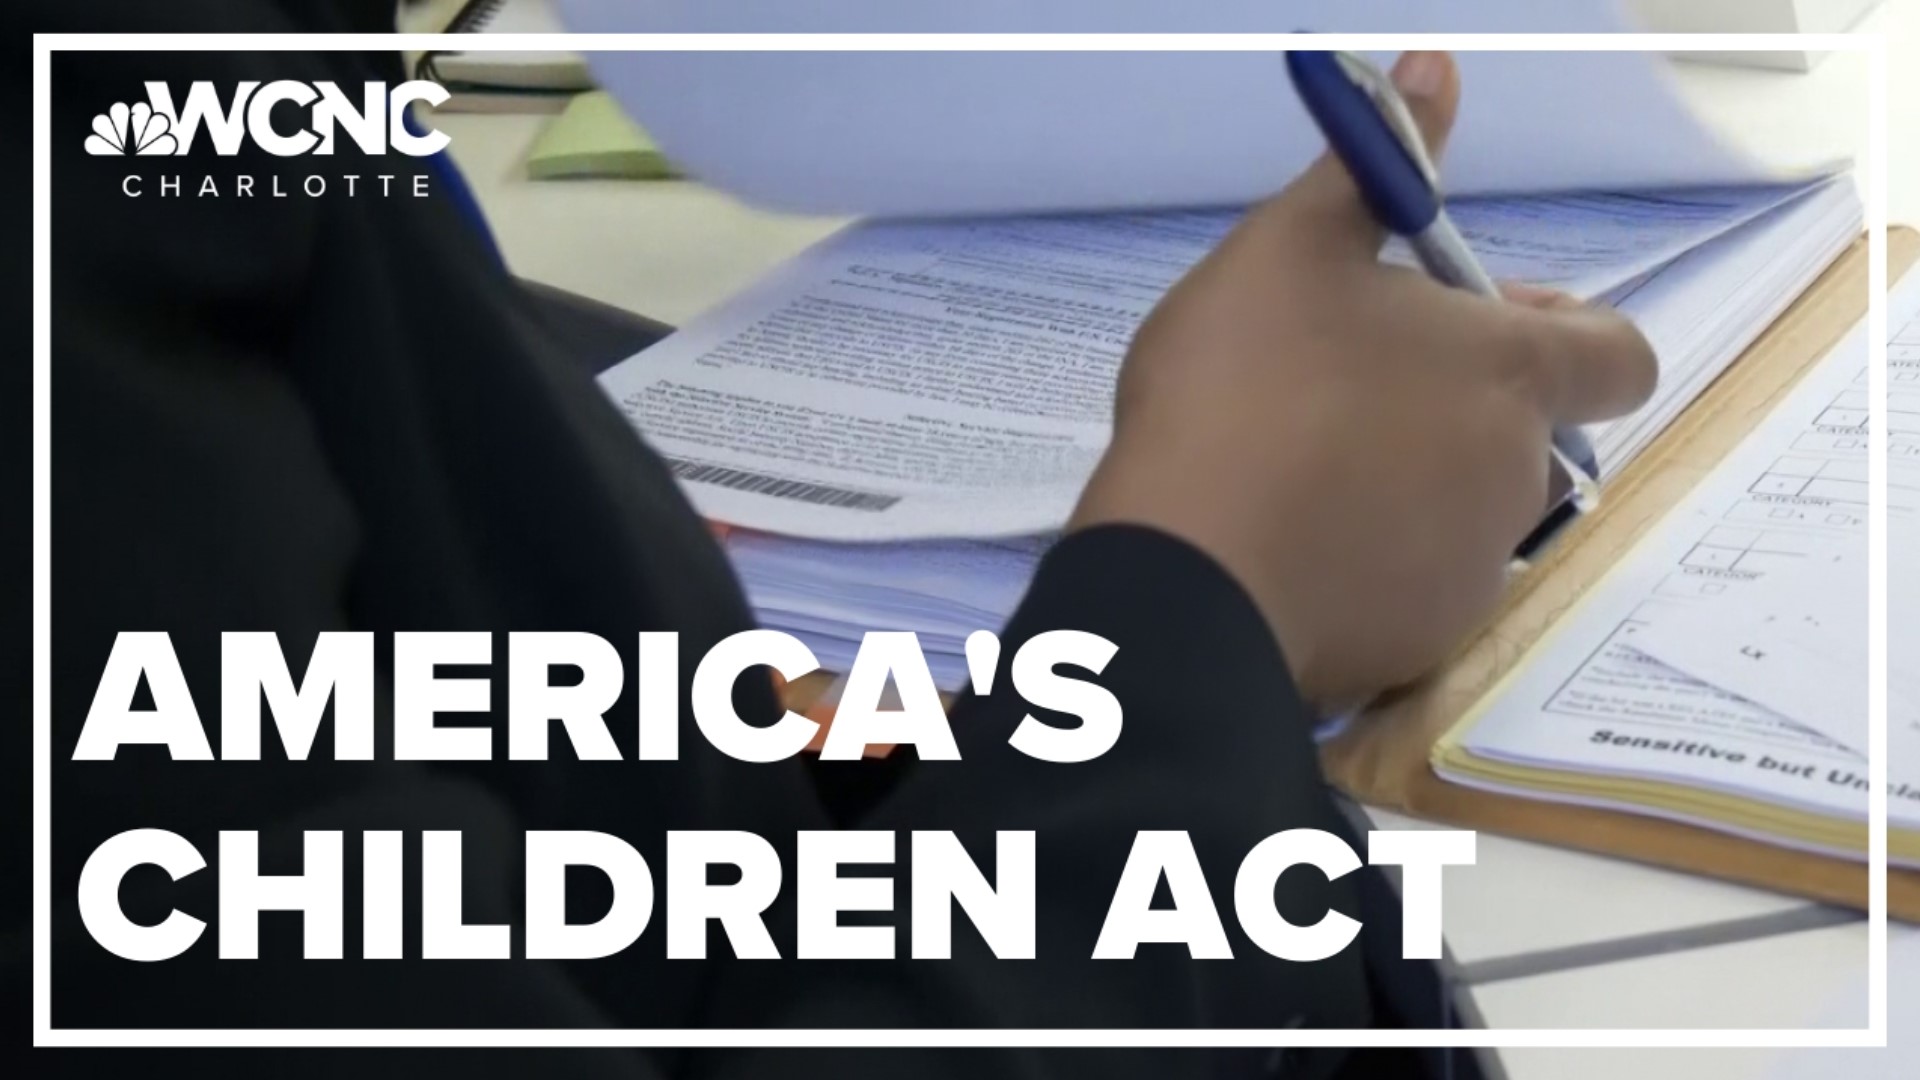 The proposed legislation known as the America’s Children Act has been reintroduced in Congress.